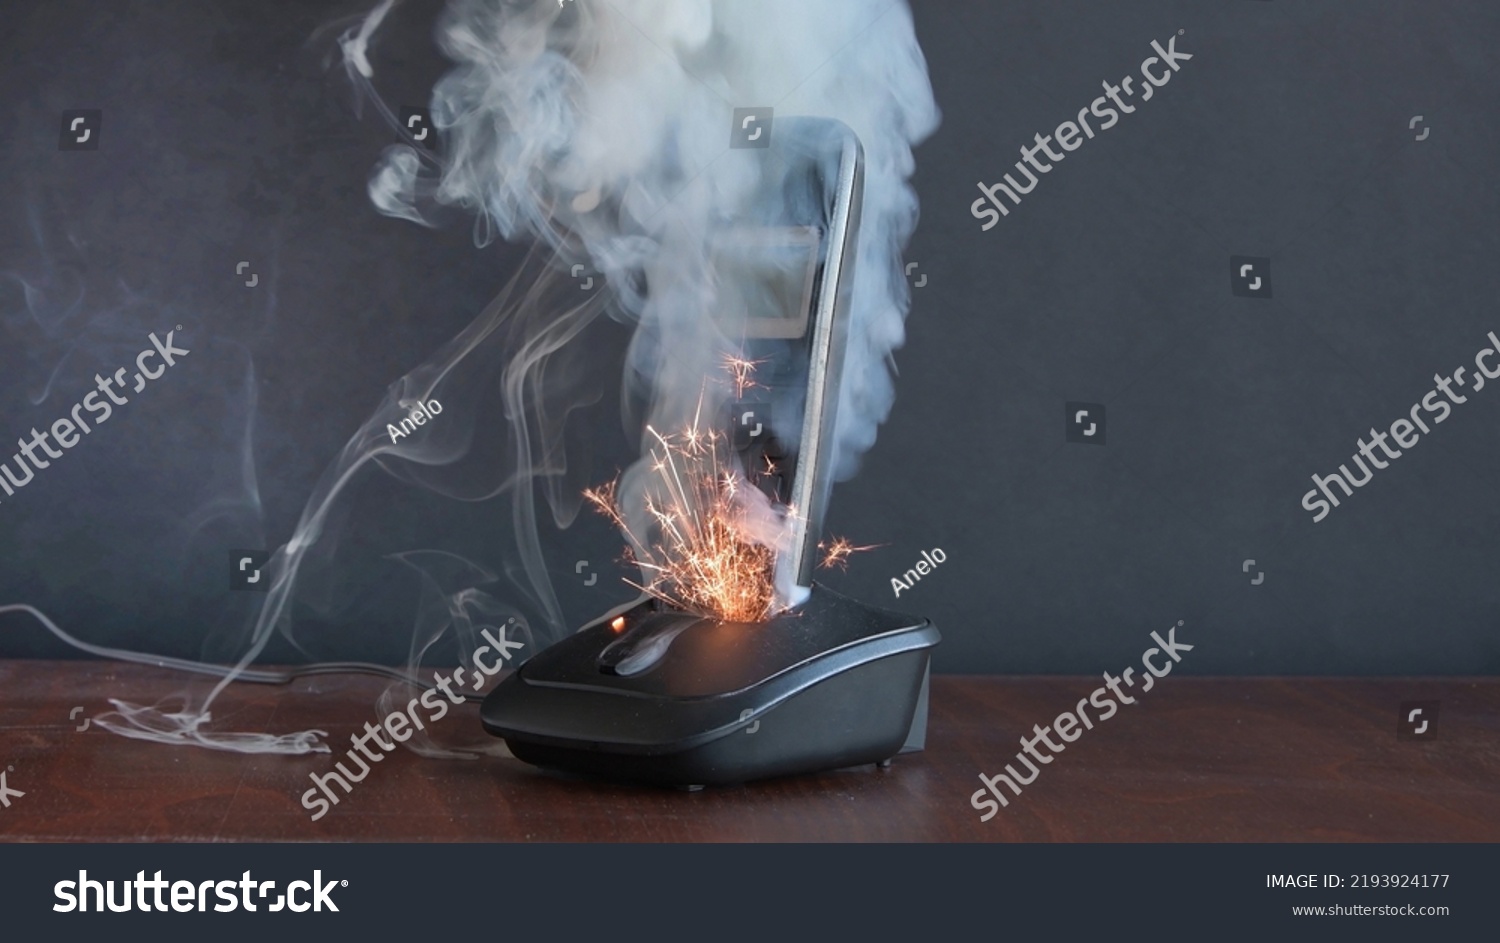 the radiotelephone smokes and burns, sparks fly, a short circuit in household electrical appliances and household appliances. Concept: house fire and electrical wiring fires. #2193924177